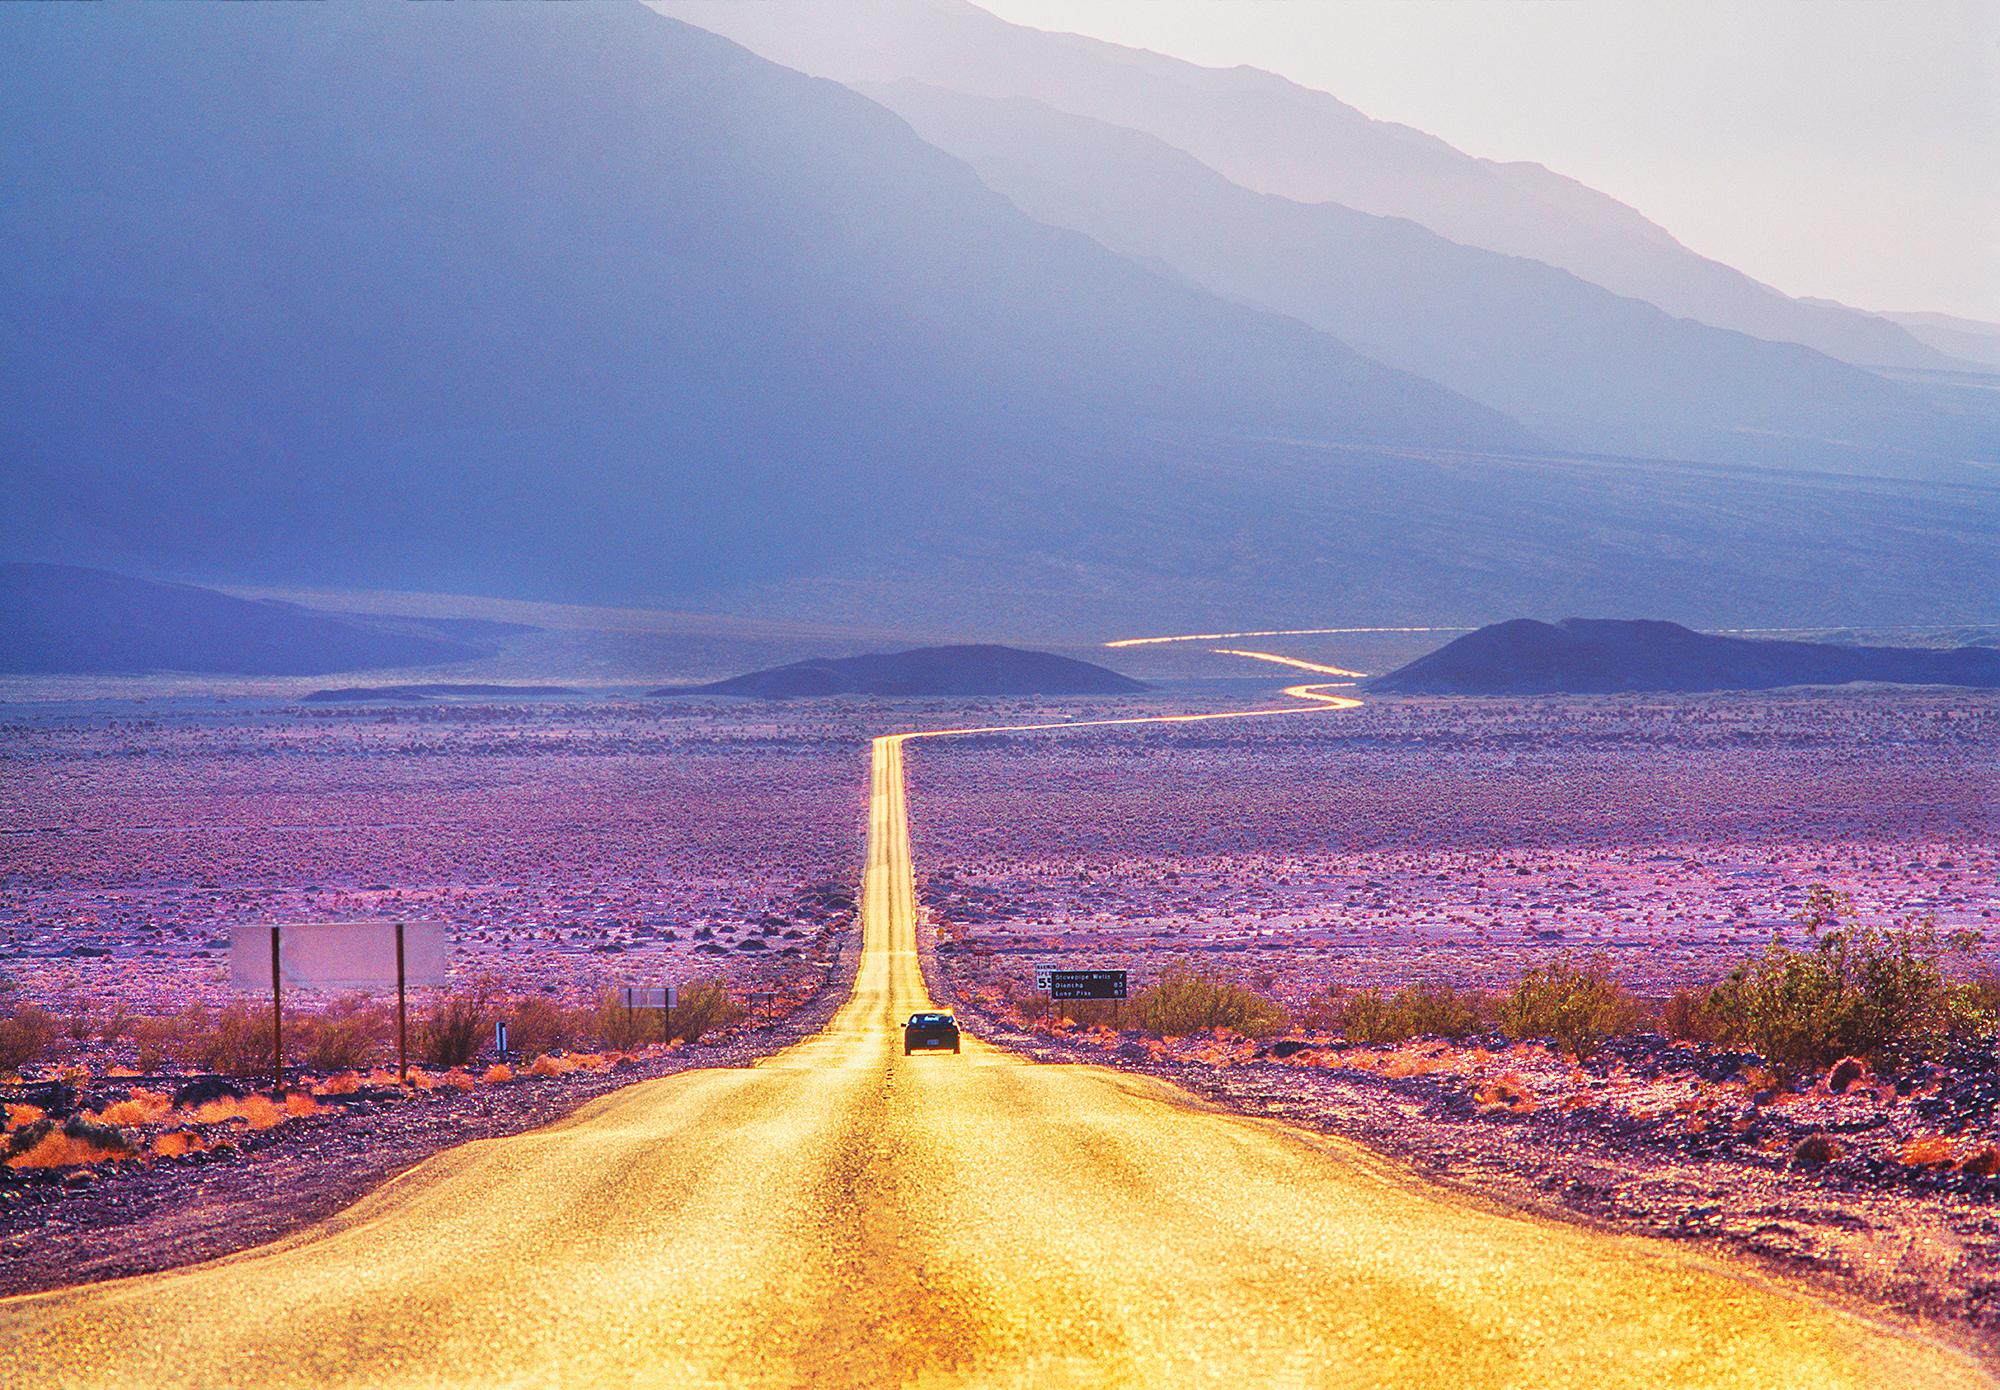 Mitchell Funk Color Photograph - Golden Dessert Road to Infinity in the American West 